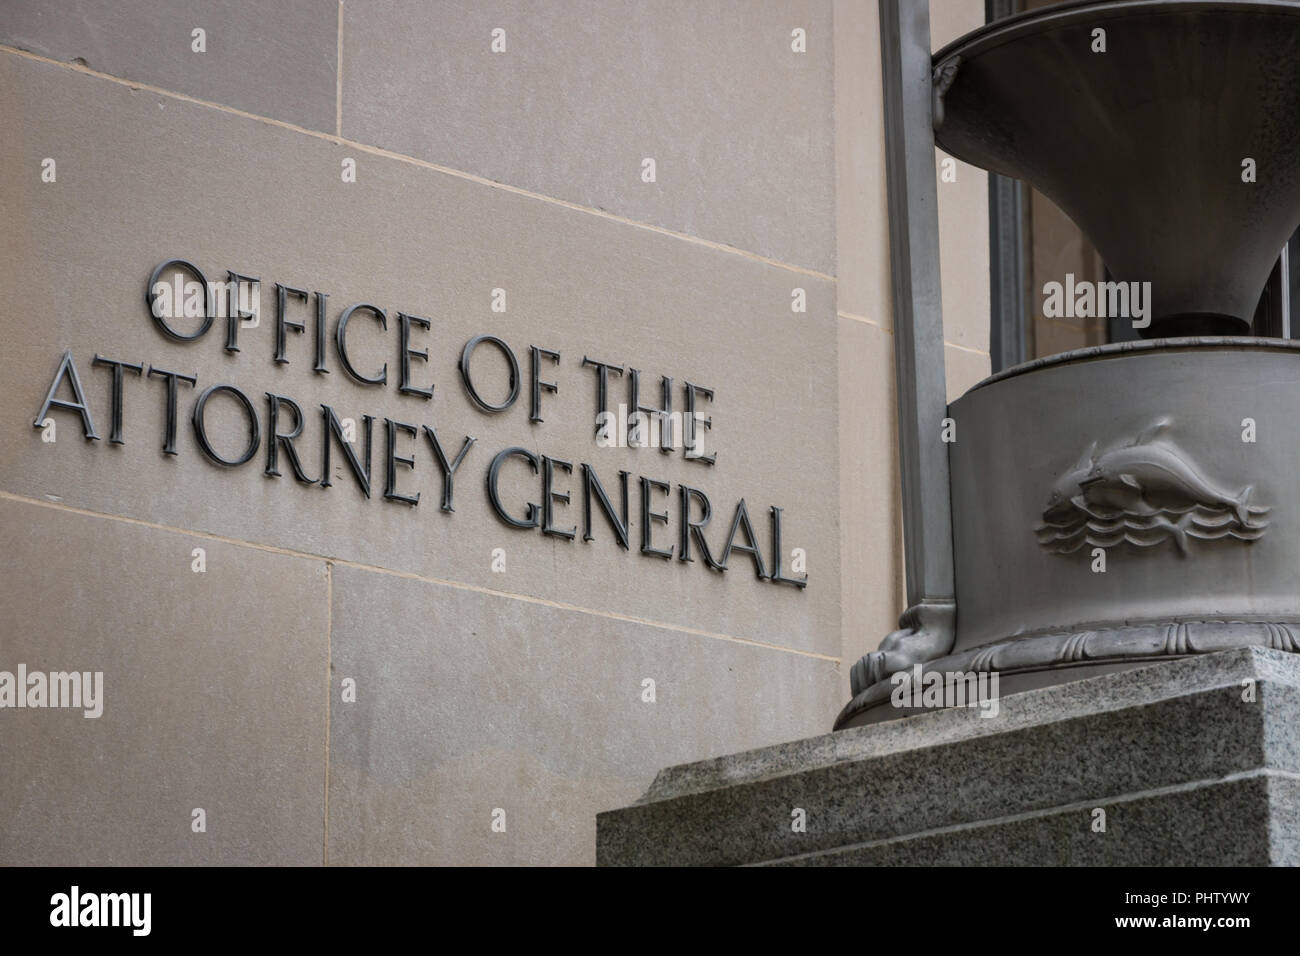 Office of the Attorney General Stock Photo